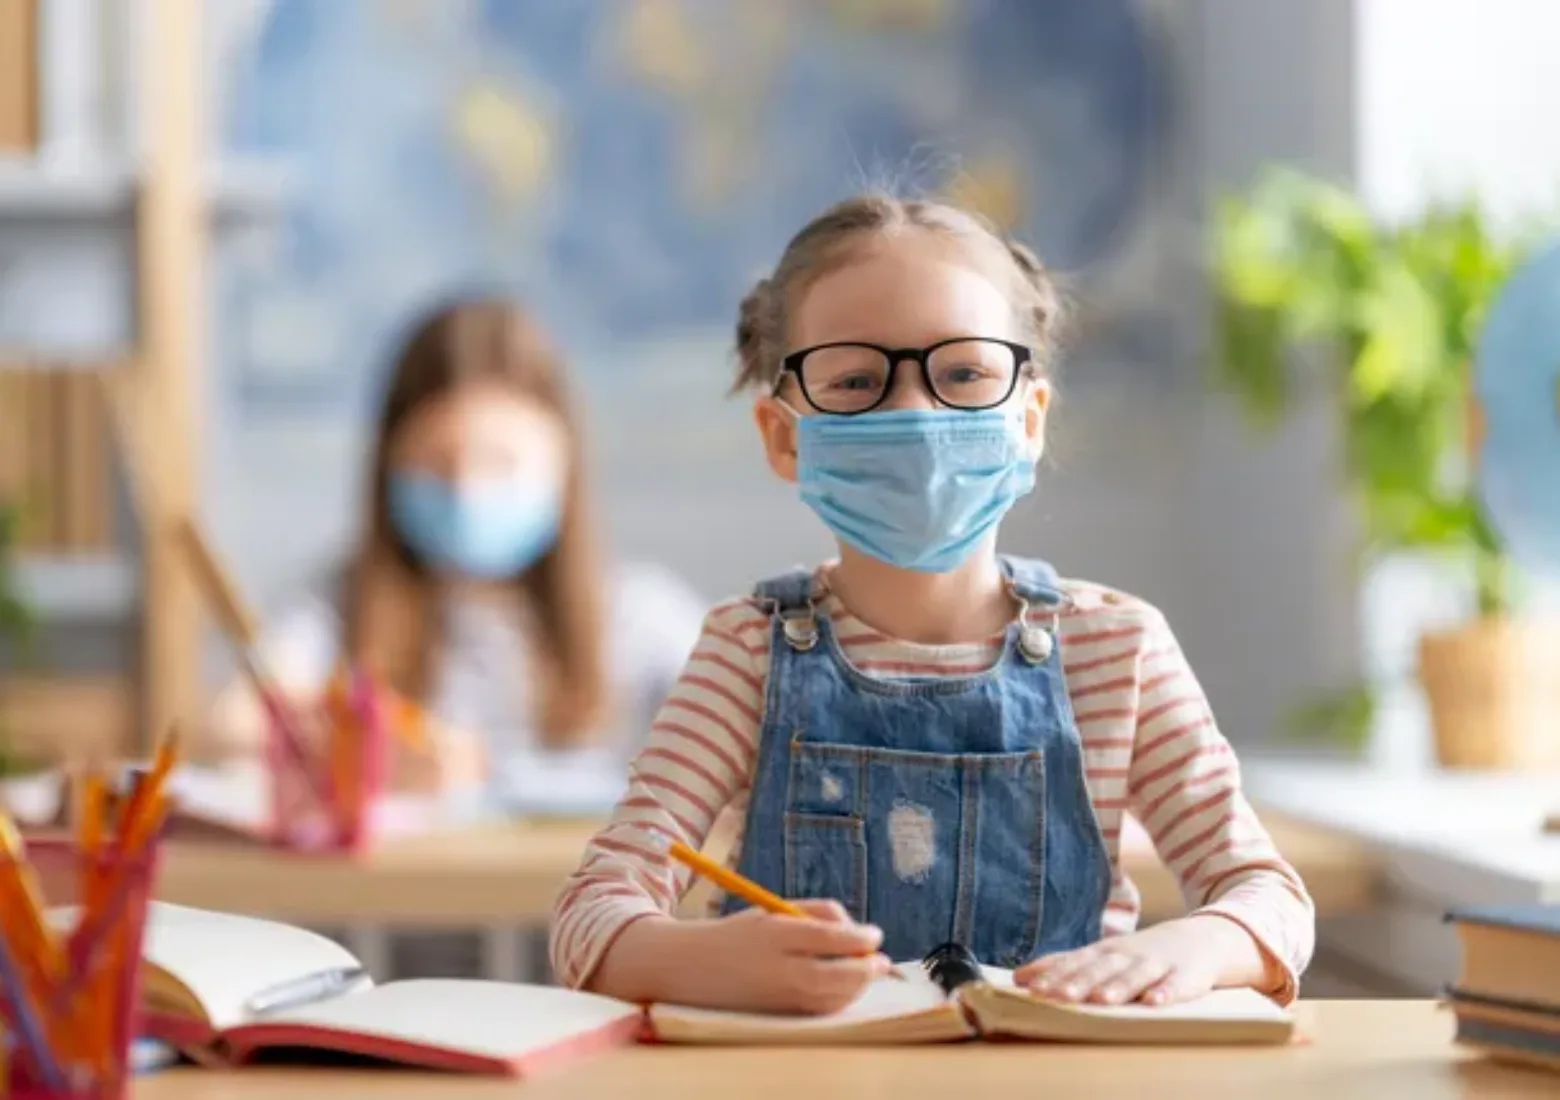 How-to-Prepare-for-a-Healthy-Back-to-School-During-a-Pandemic.